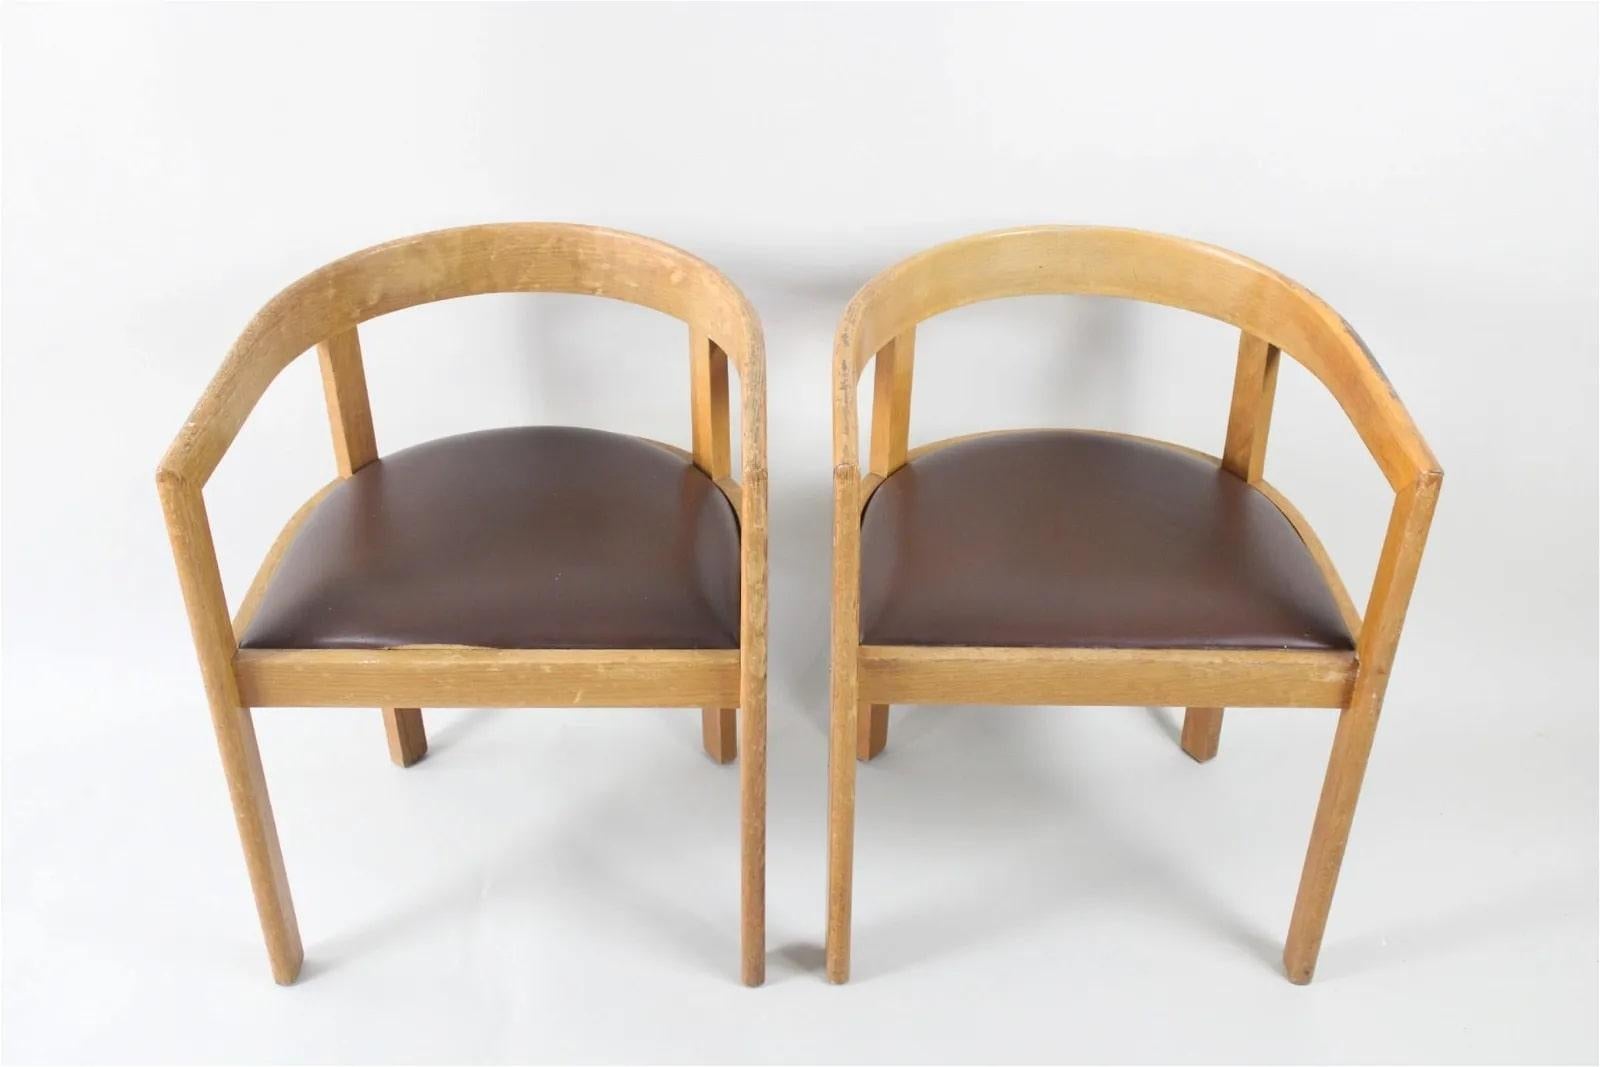 Great matching pair are club-chair shape, with smooth, rounded back and arm rests, with brown leather seats.

Condition is good with one chair repaired, surface wear and scuffs commensurate with age.  Leather needs slight refinishing on one (see